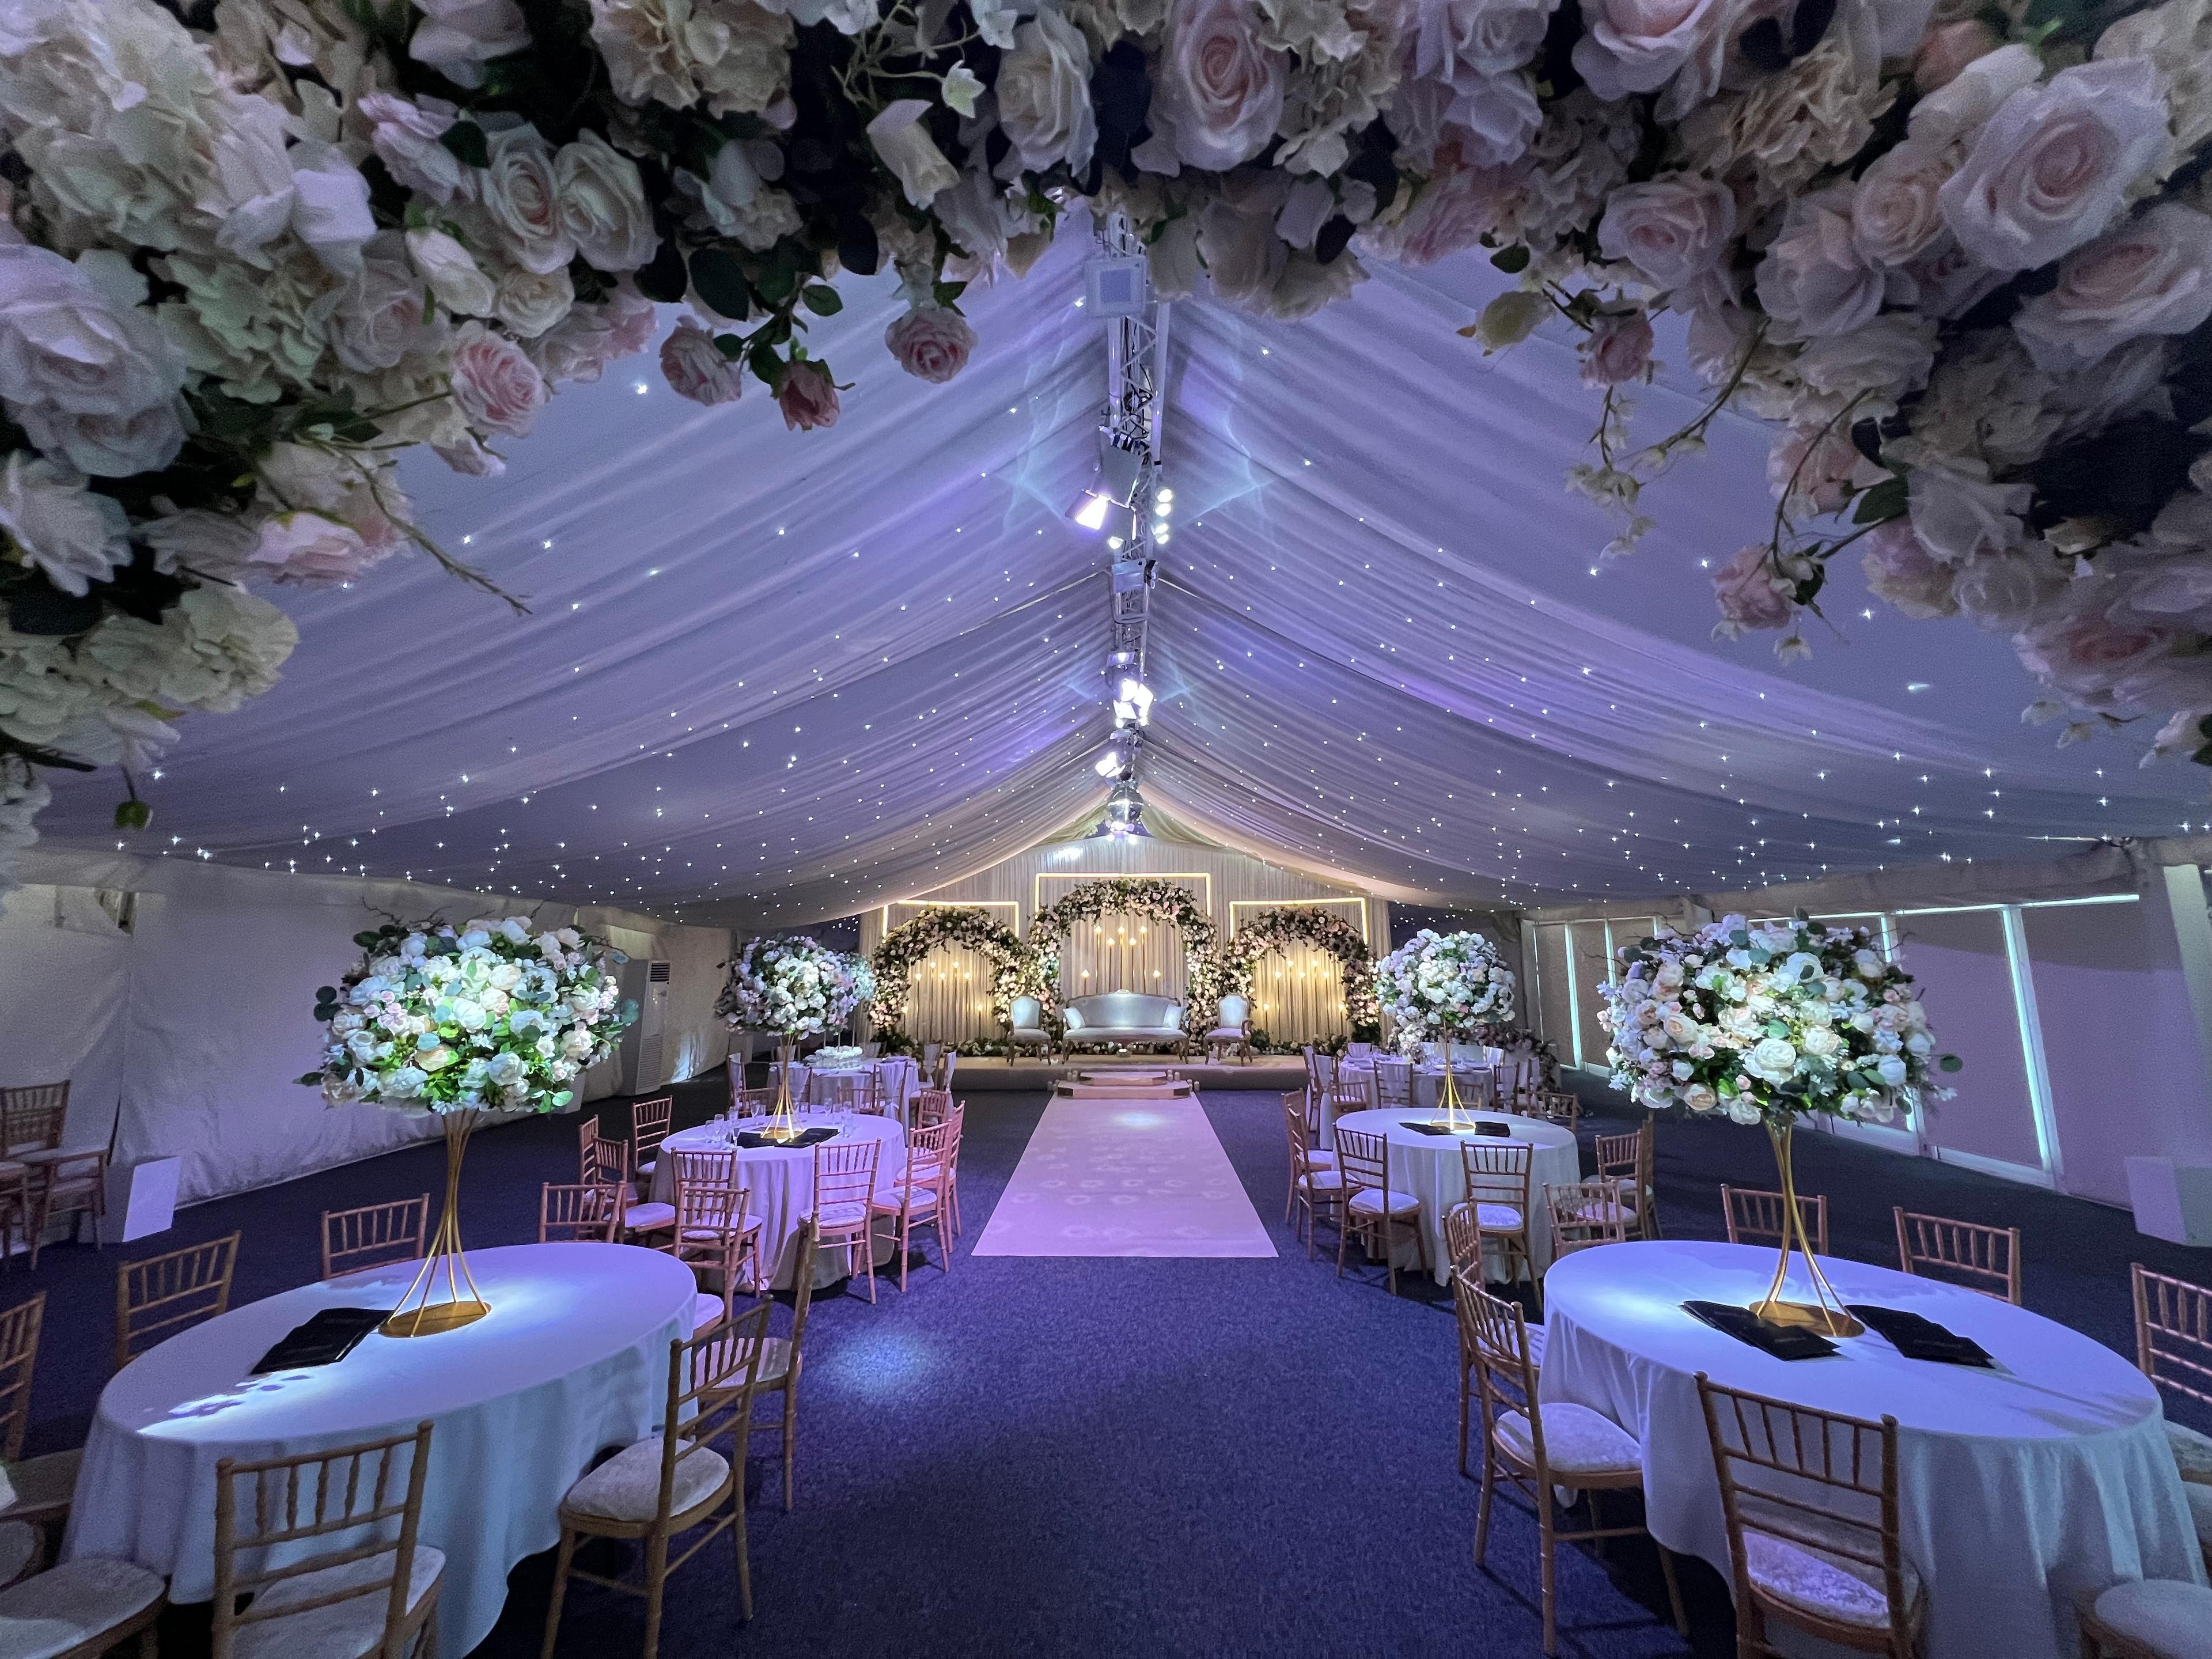 Exclusive Hire, The Conservatory At The Luton Hoo Walled Garden photo #1